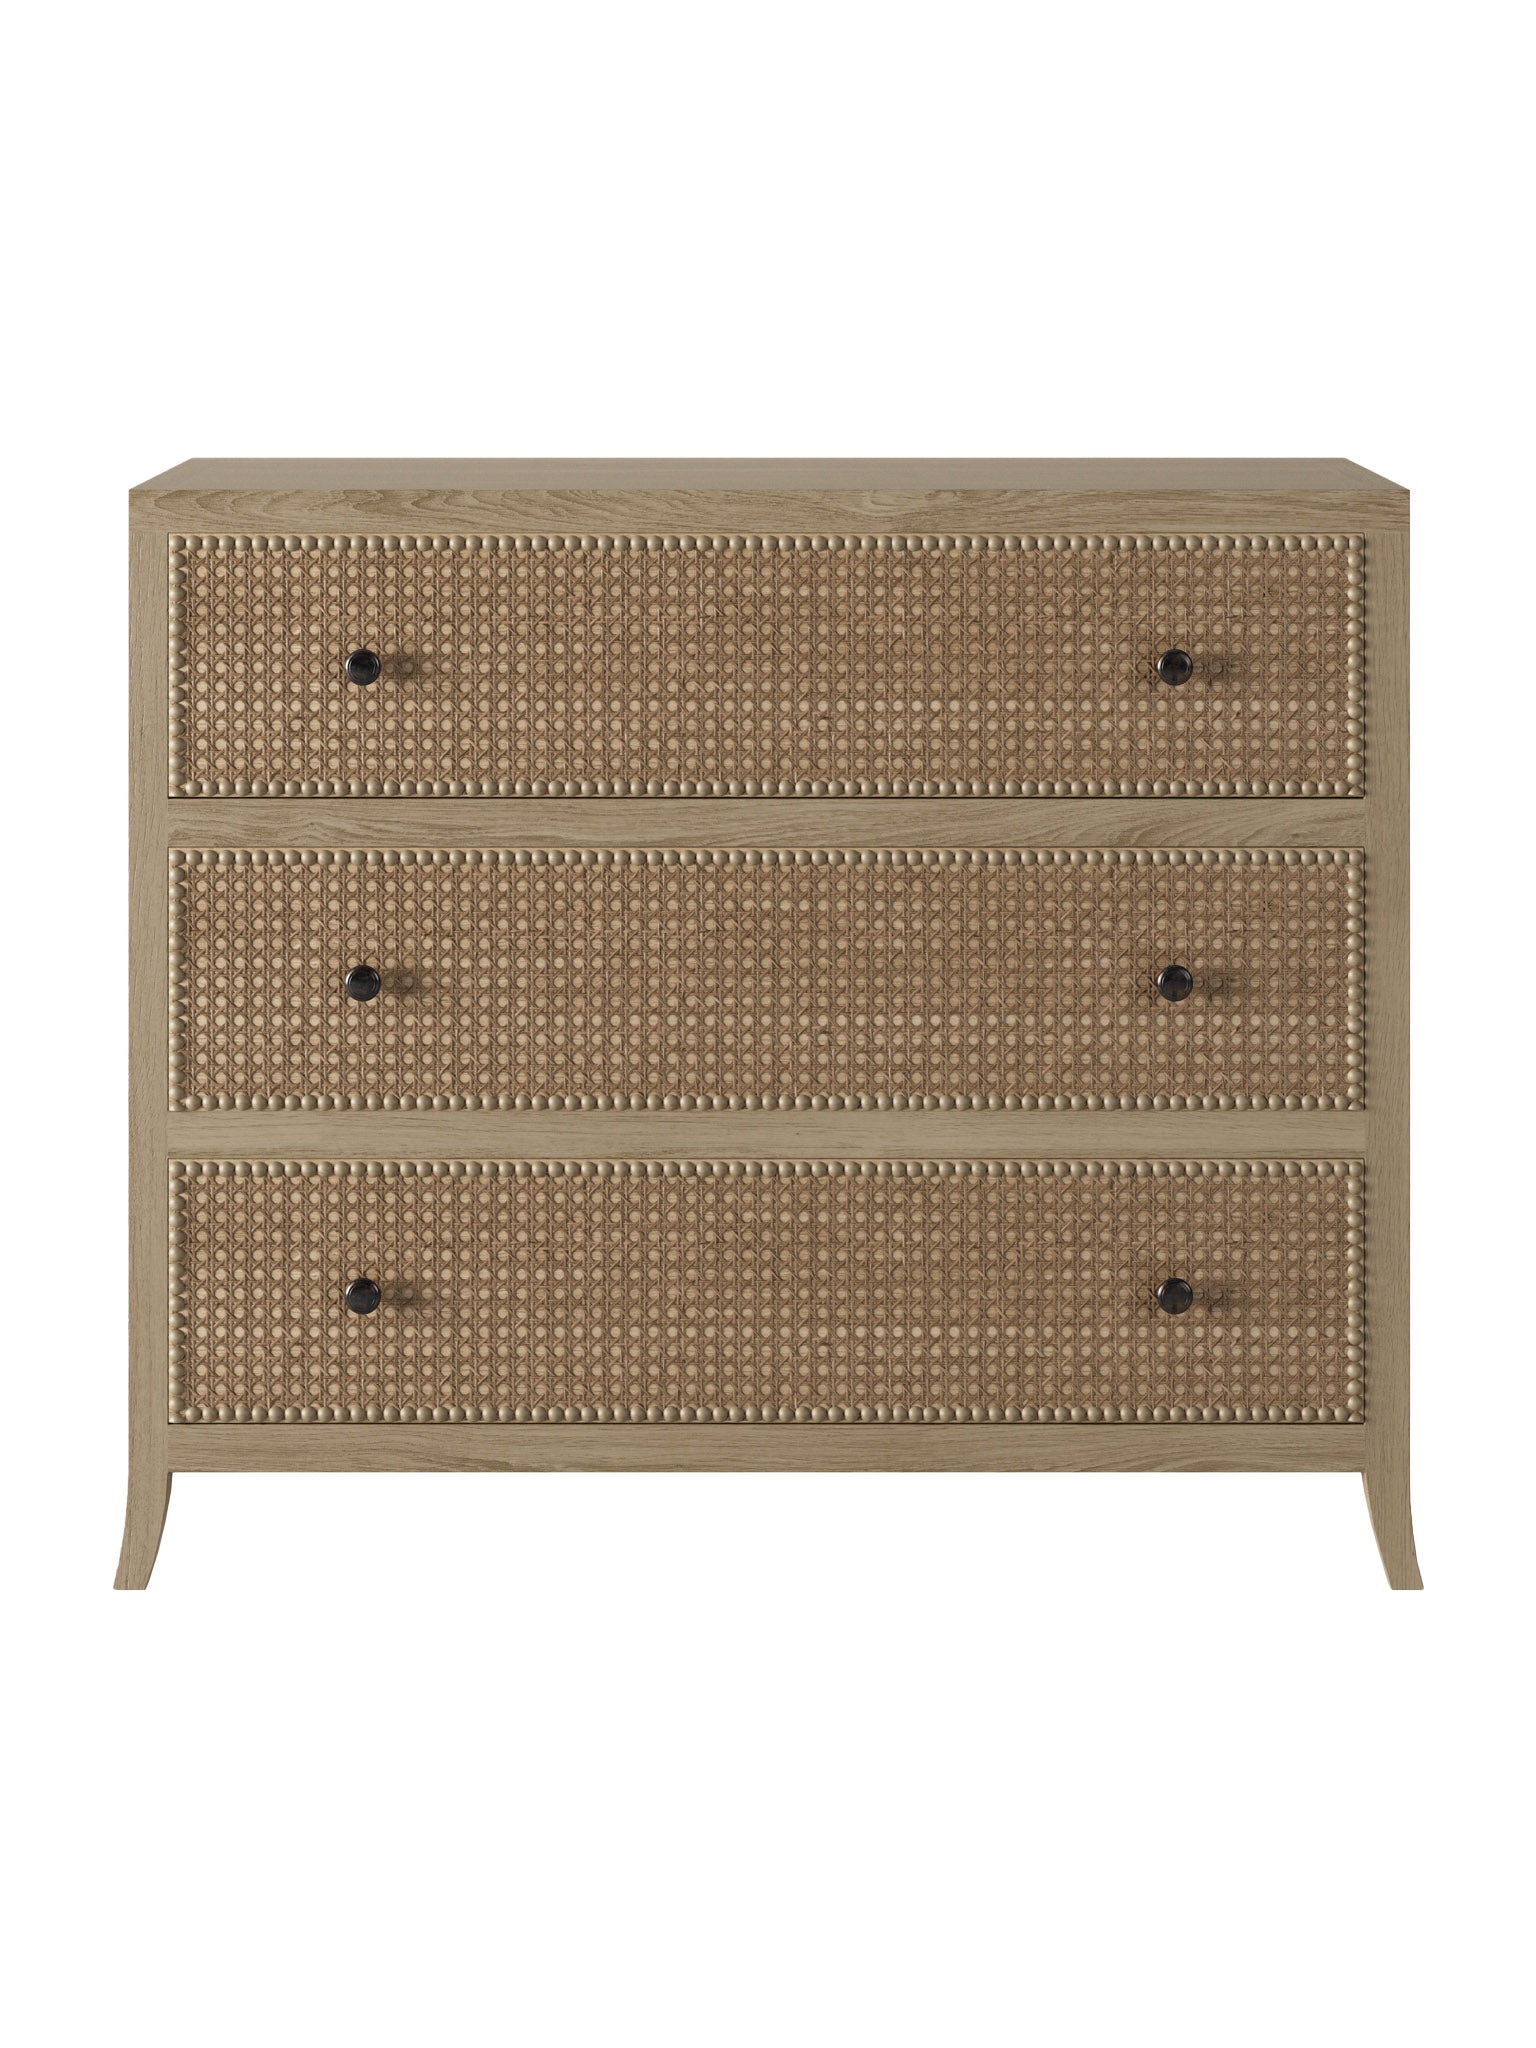 Oak and rattan laticed front 3 drawer chest of drawers